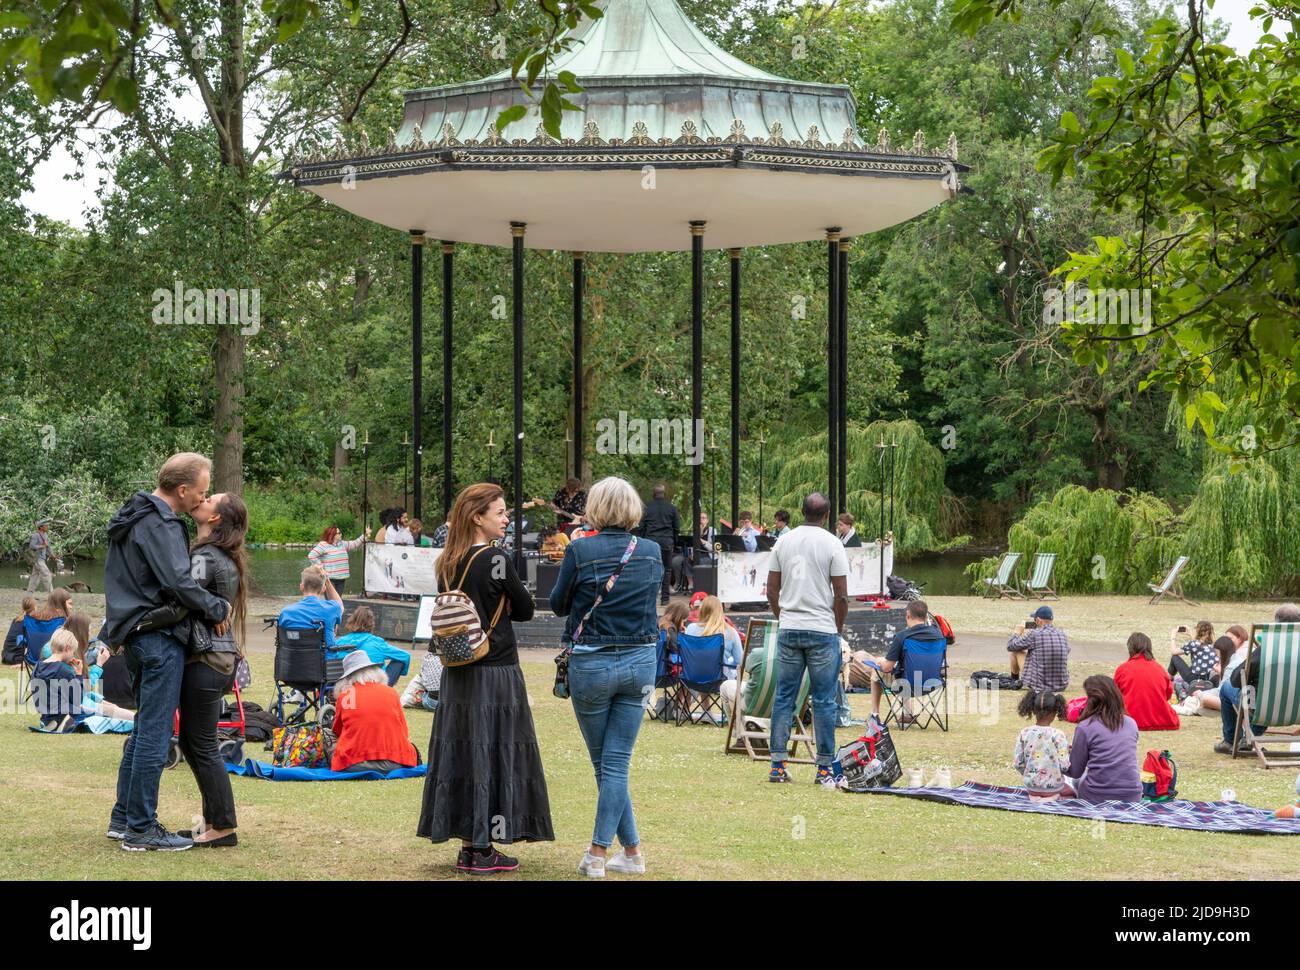 Regent's Park, London, UK. 19th June 2022. Crowds enjoy the National Youth Jazz Orchestra (NYJO) surrounding the Bandstand in the Regent's Park, central London, on June 19, 2022. The Festival continues on Sundays and Bank Holidays until September 2022. Credit: Rob Taggart/Alamy Live News Stock Photo